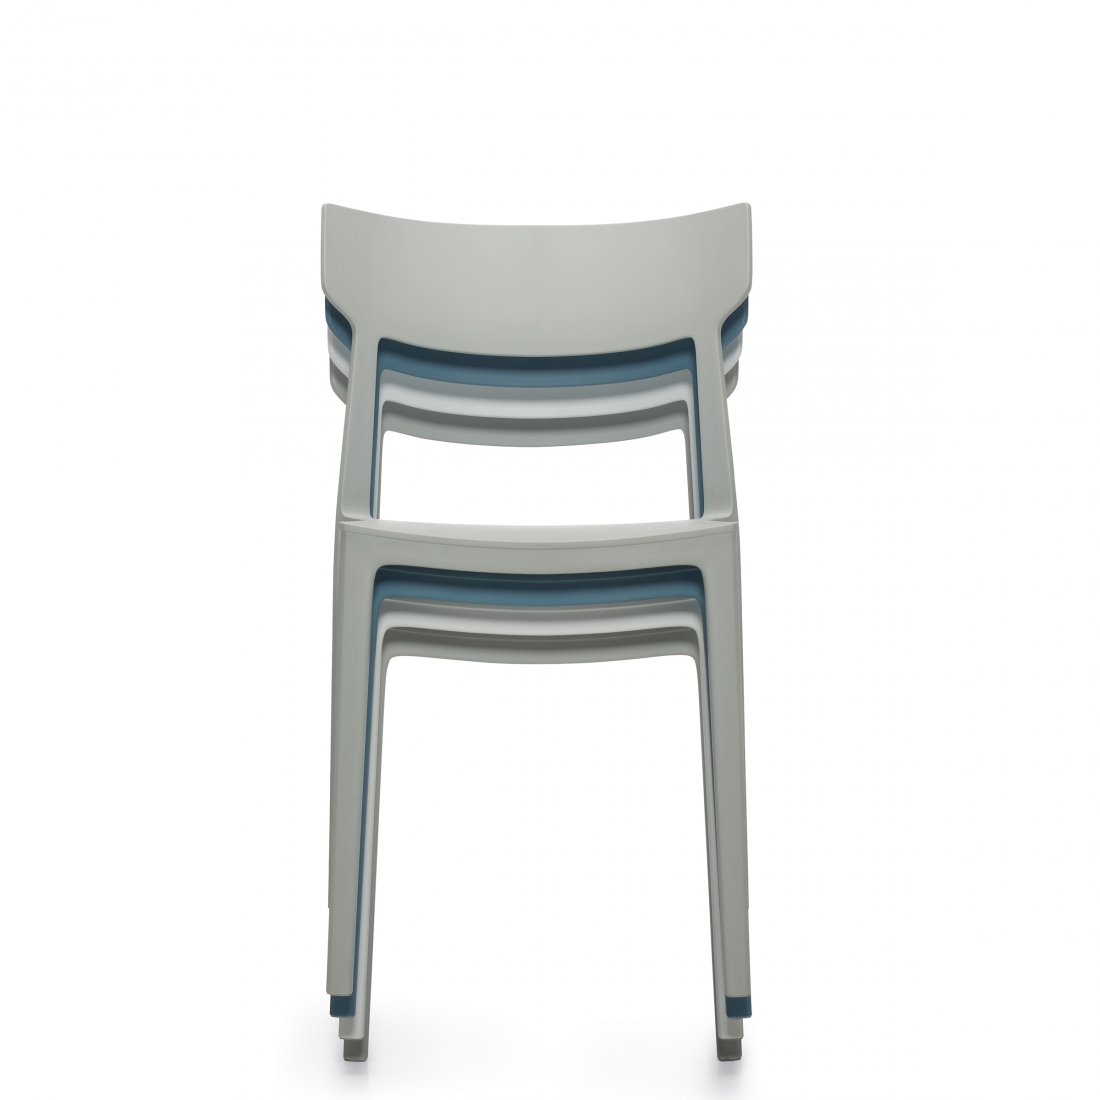 Kylie | Multi-Purpose Stacking Chair - Grey